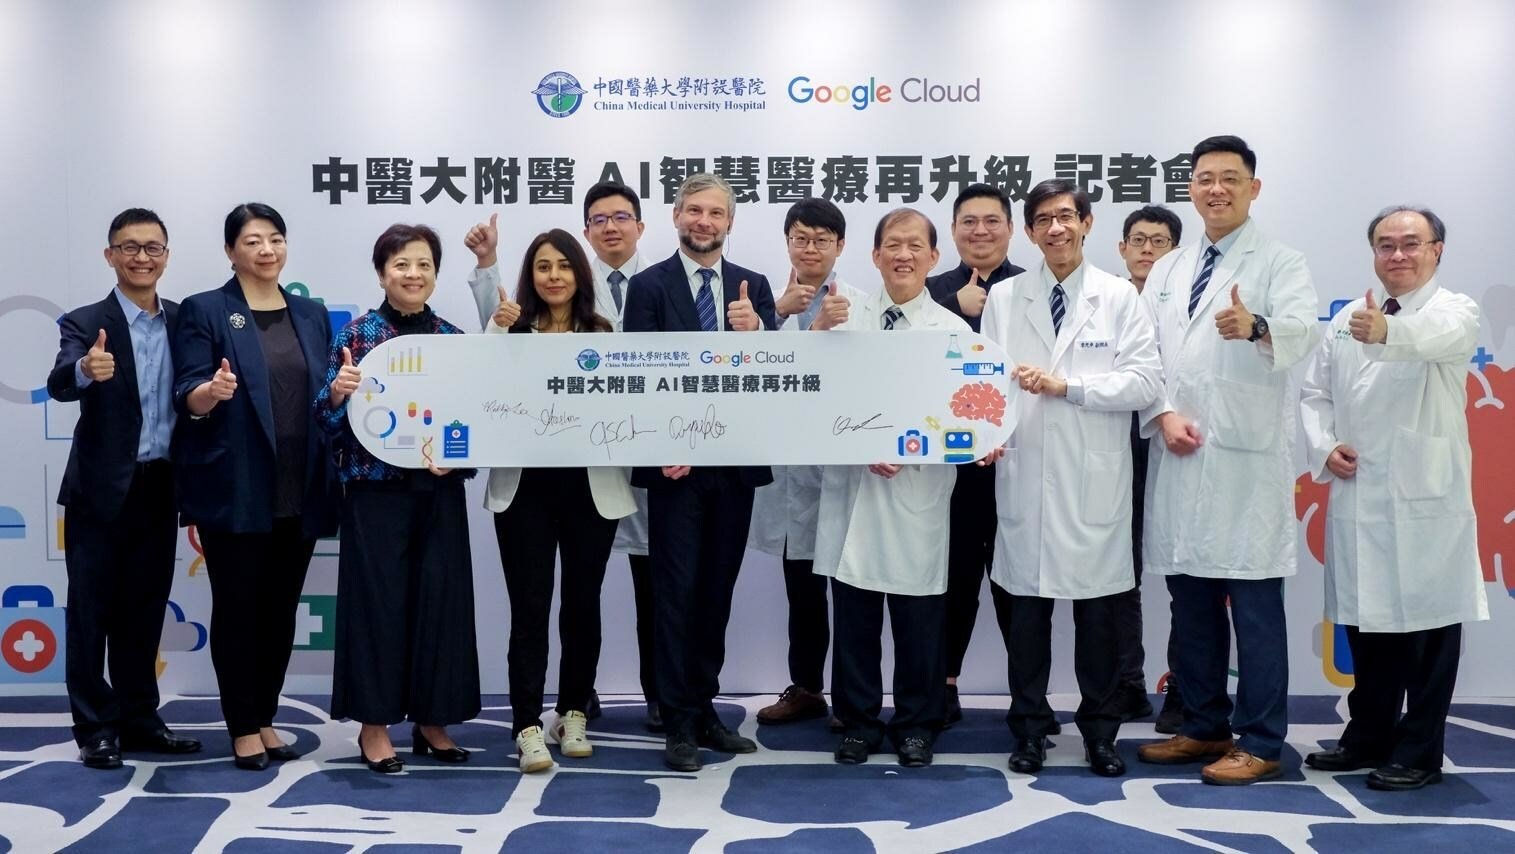 Google Cloud and CMUH celebrate their collaboration